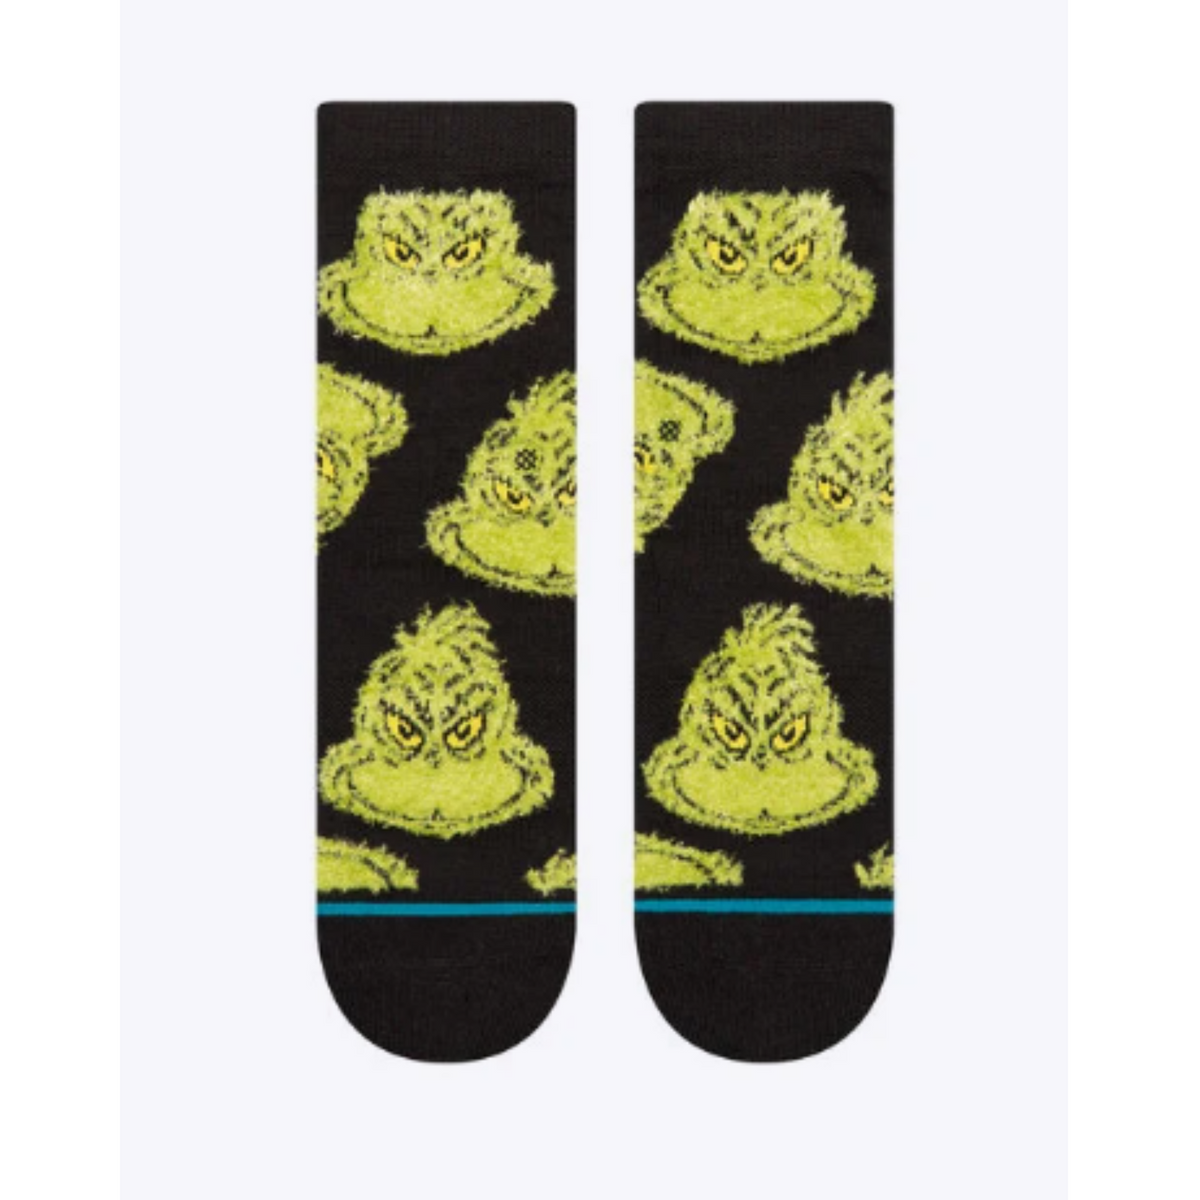 Top of Stance The Grinch Mean One kids&#39; crew sock featuring a black sock with images of The Grinch all over.